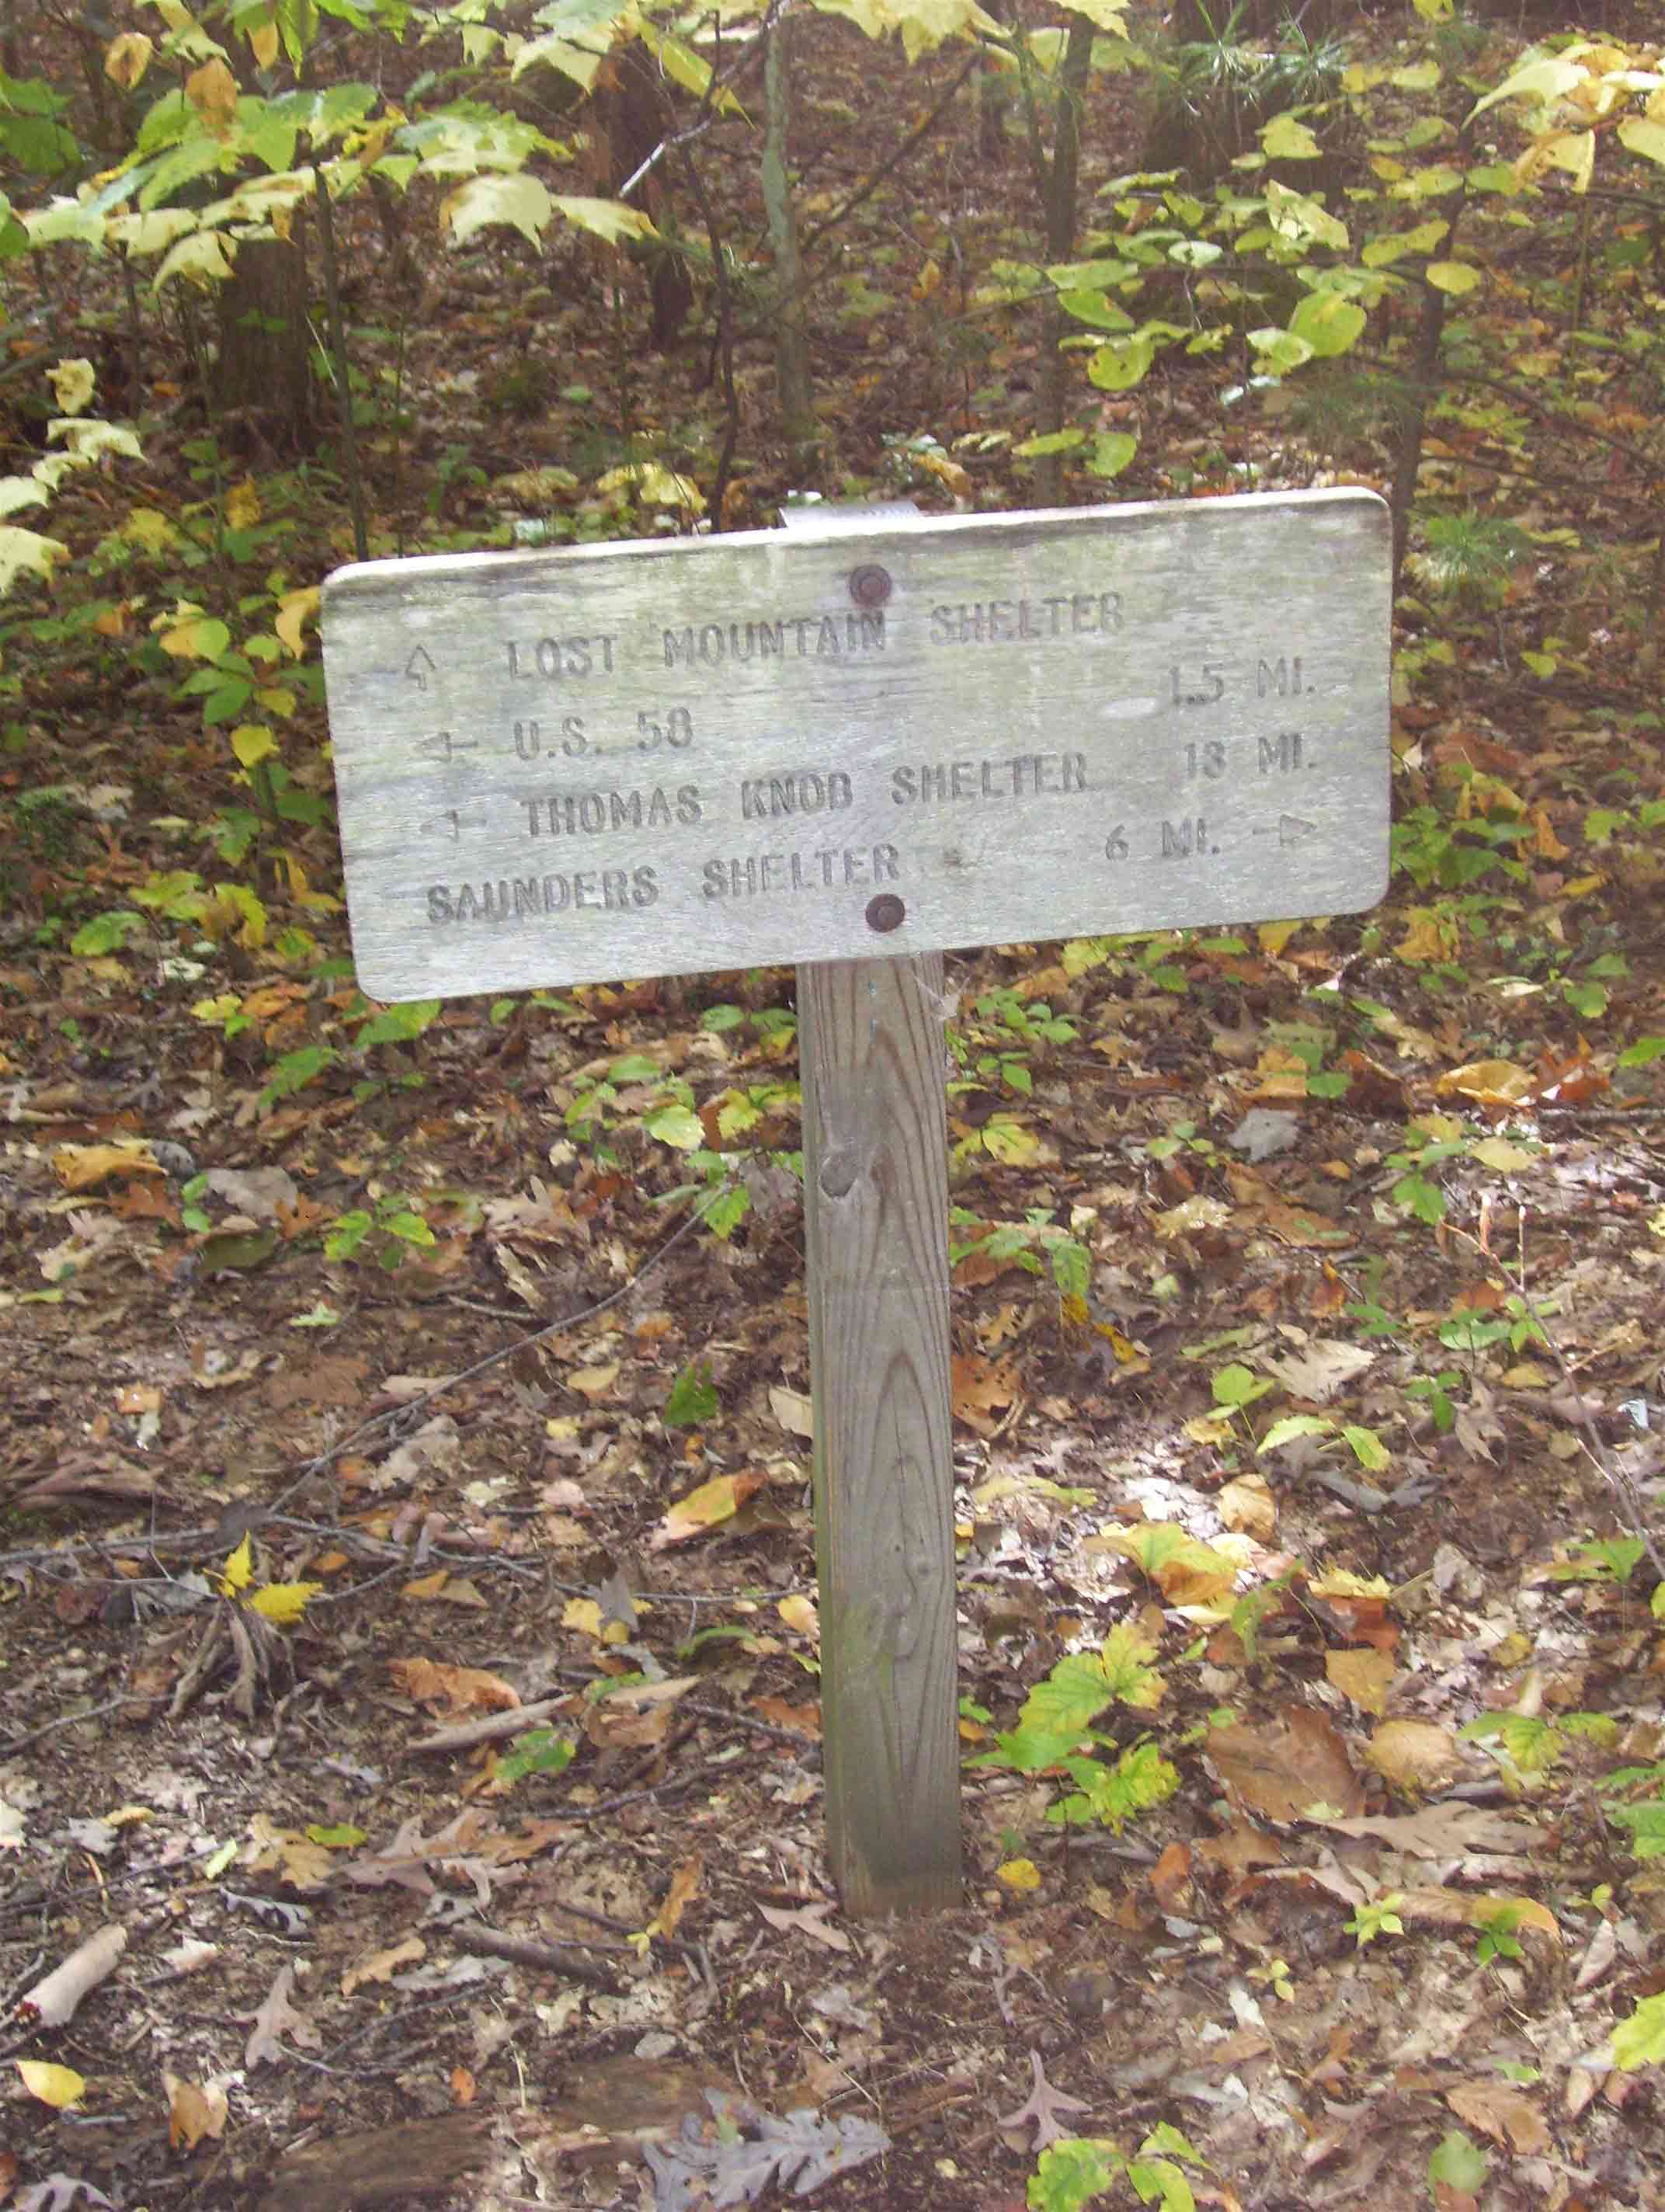 mm 1.1 Trail sign at intersection with trail to Lost Mountain Shelter.  Courtesy dlcul@conncoll.edu